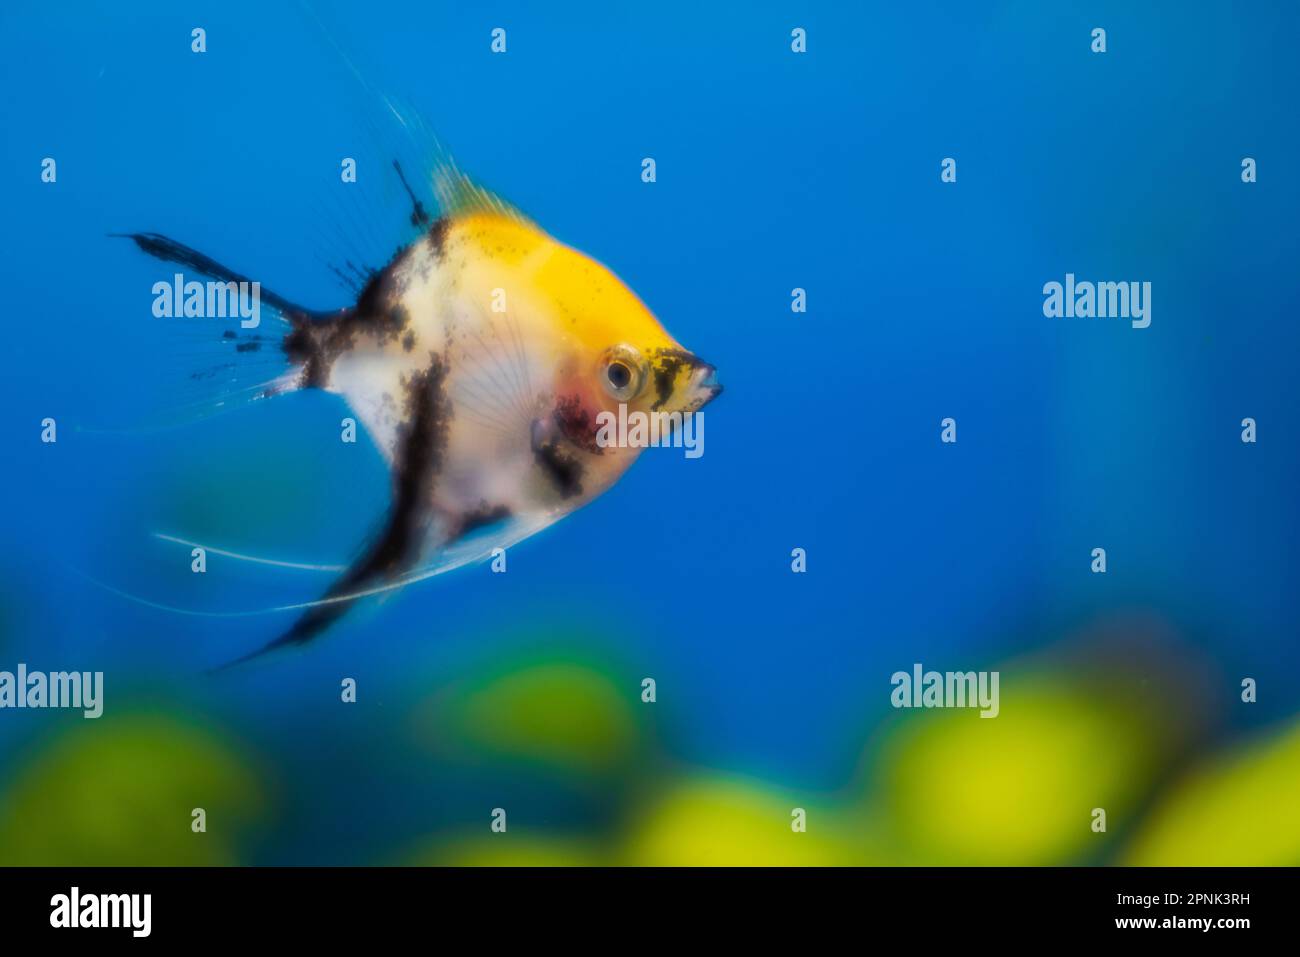 Close up view of aquarium with colorful angelfish. Stock Photo